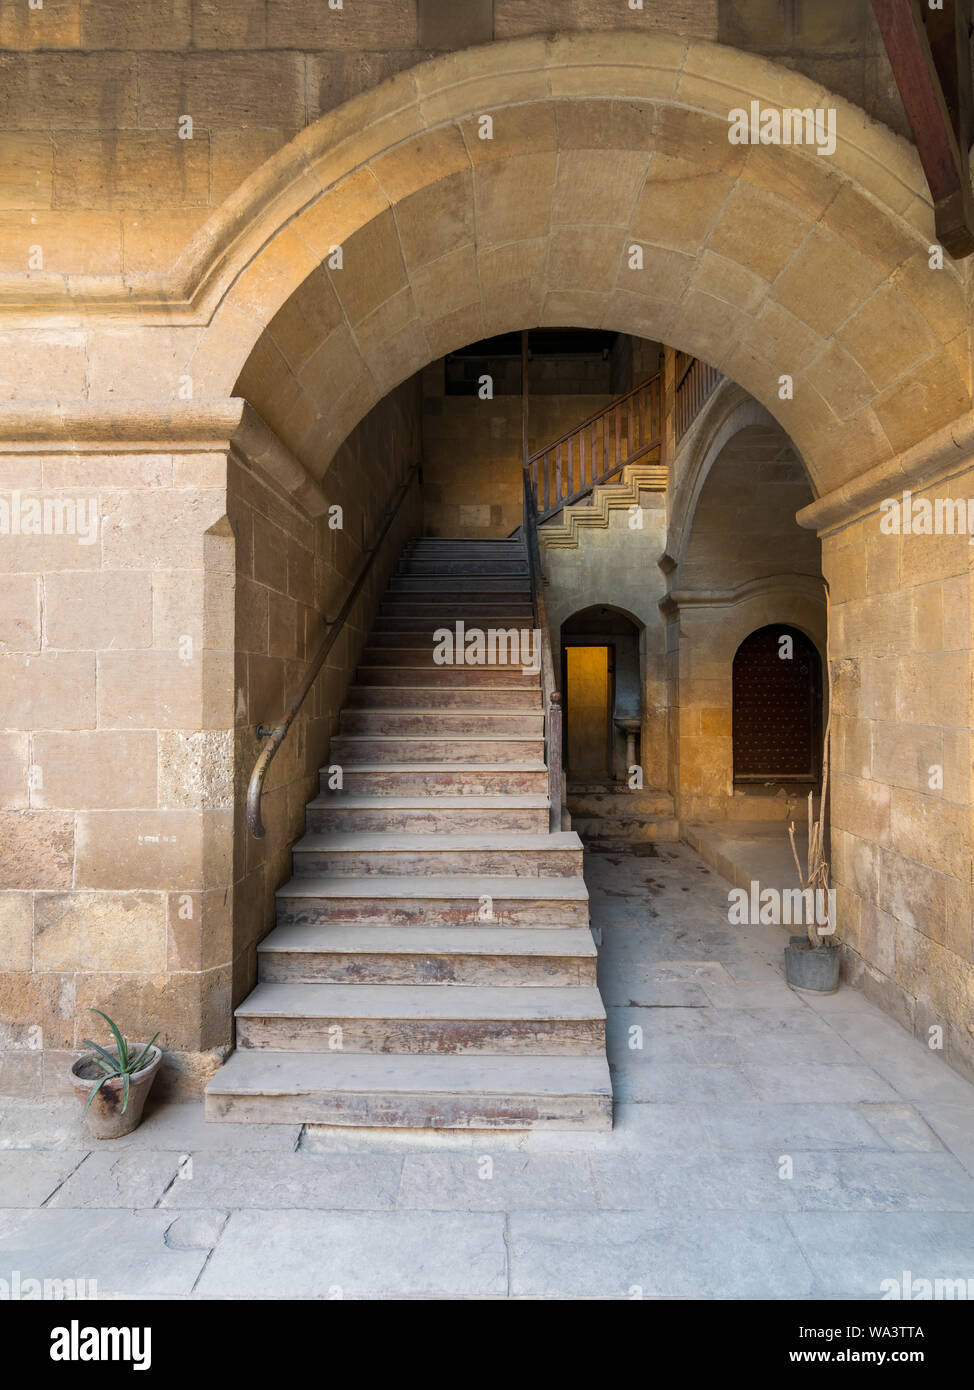 Exterior daylight shot of staircase going up leading to Caravansary - Wikala - of Bazaraa, suited in Gamalia district, Medieval Cairo, Egypt Stock Photo